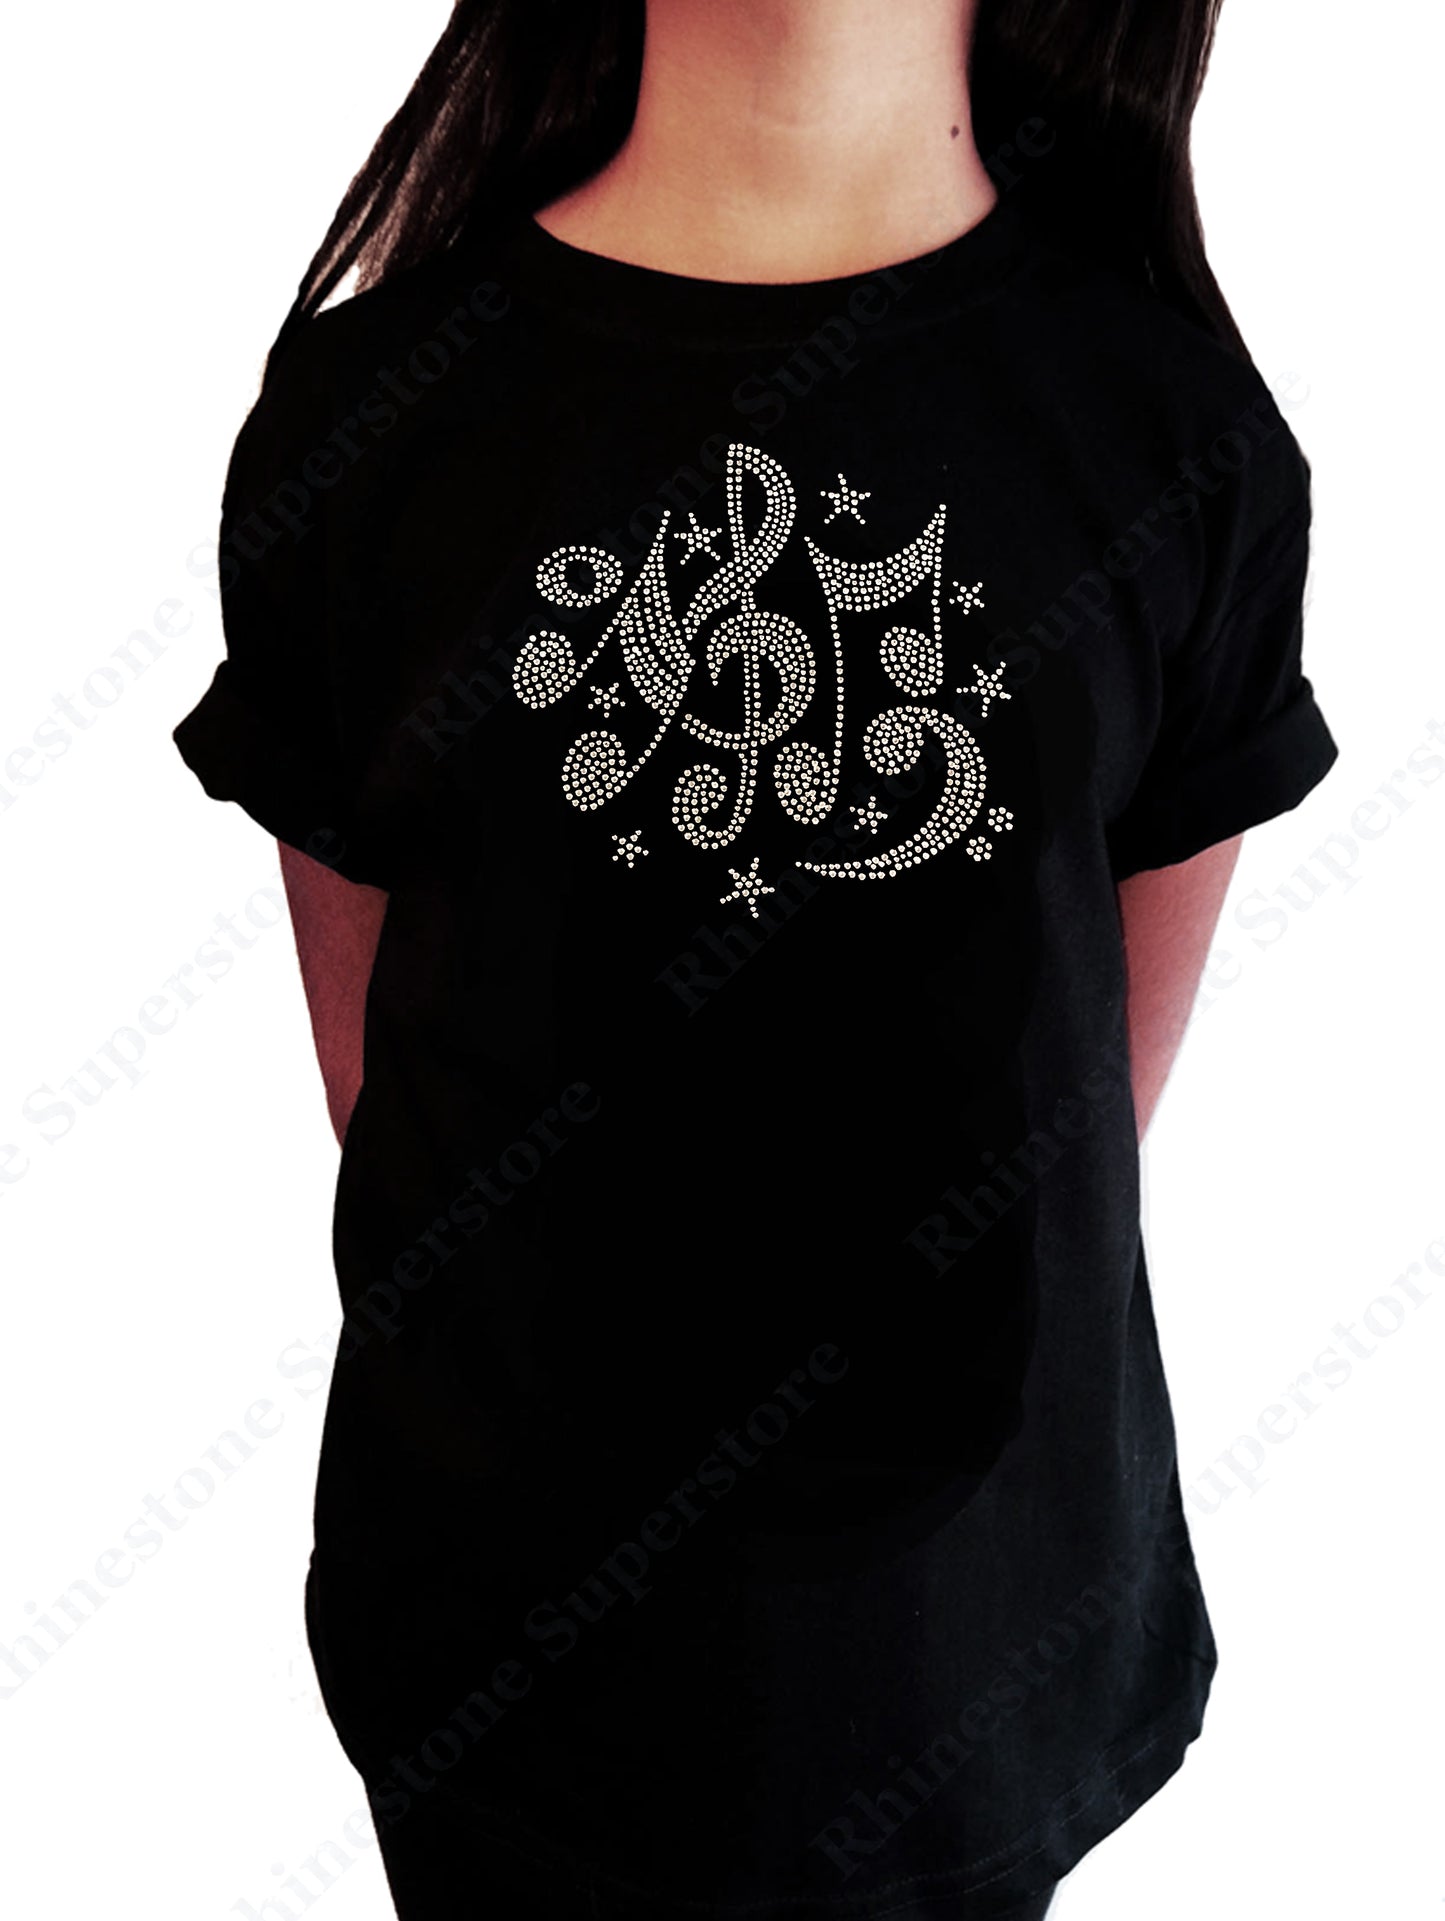 Girls Rhinestone T-Shirt " Music Notes and Stars " Kids Size 3 to 14 Available